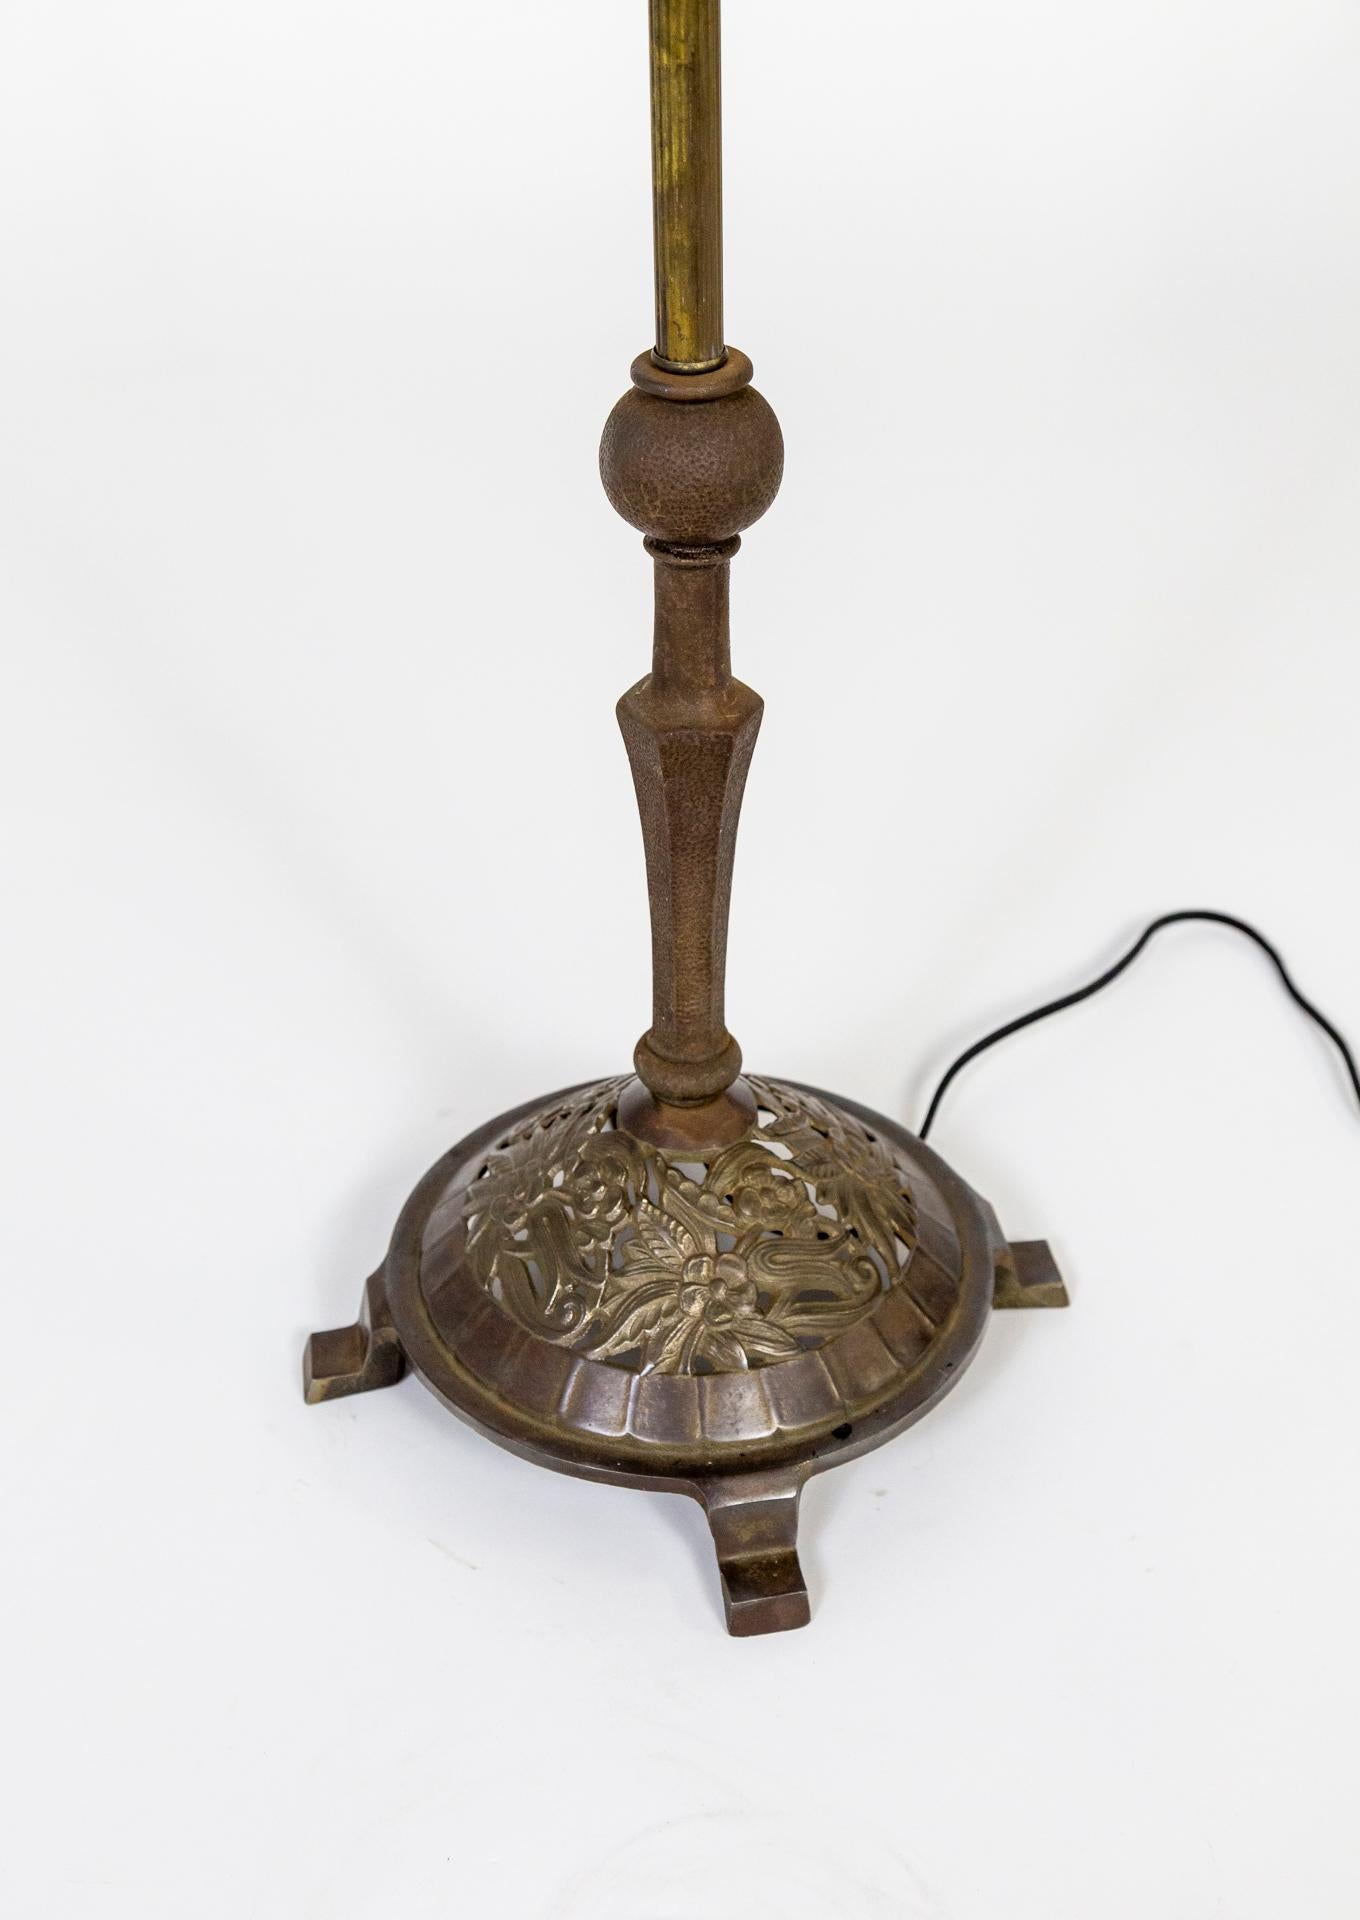 A heavy, brass and wrought iron harp floor lamp with a dome shaped base with beautifully cast flowers. In Art Deco, Craftsman style, with a molded, angular, frosted glass shade; adjustable neck and original switch on the socket. Early 20th century.